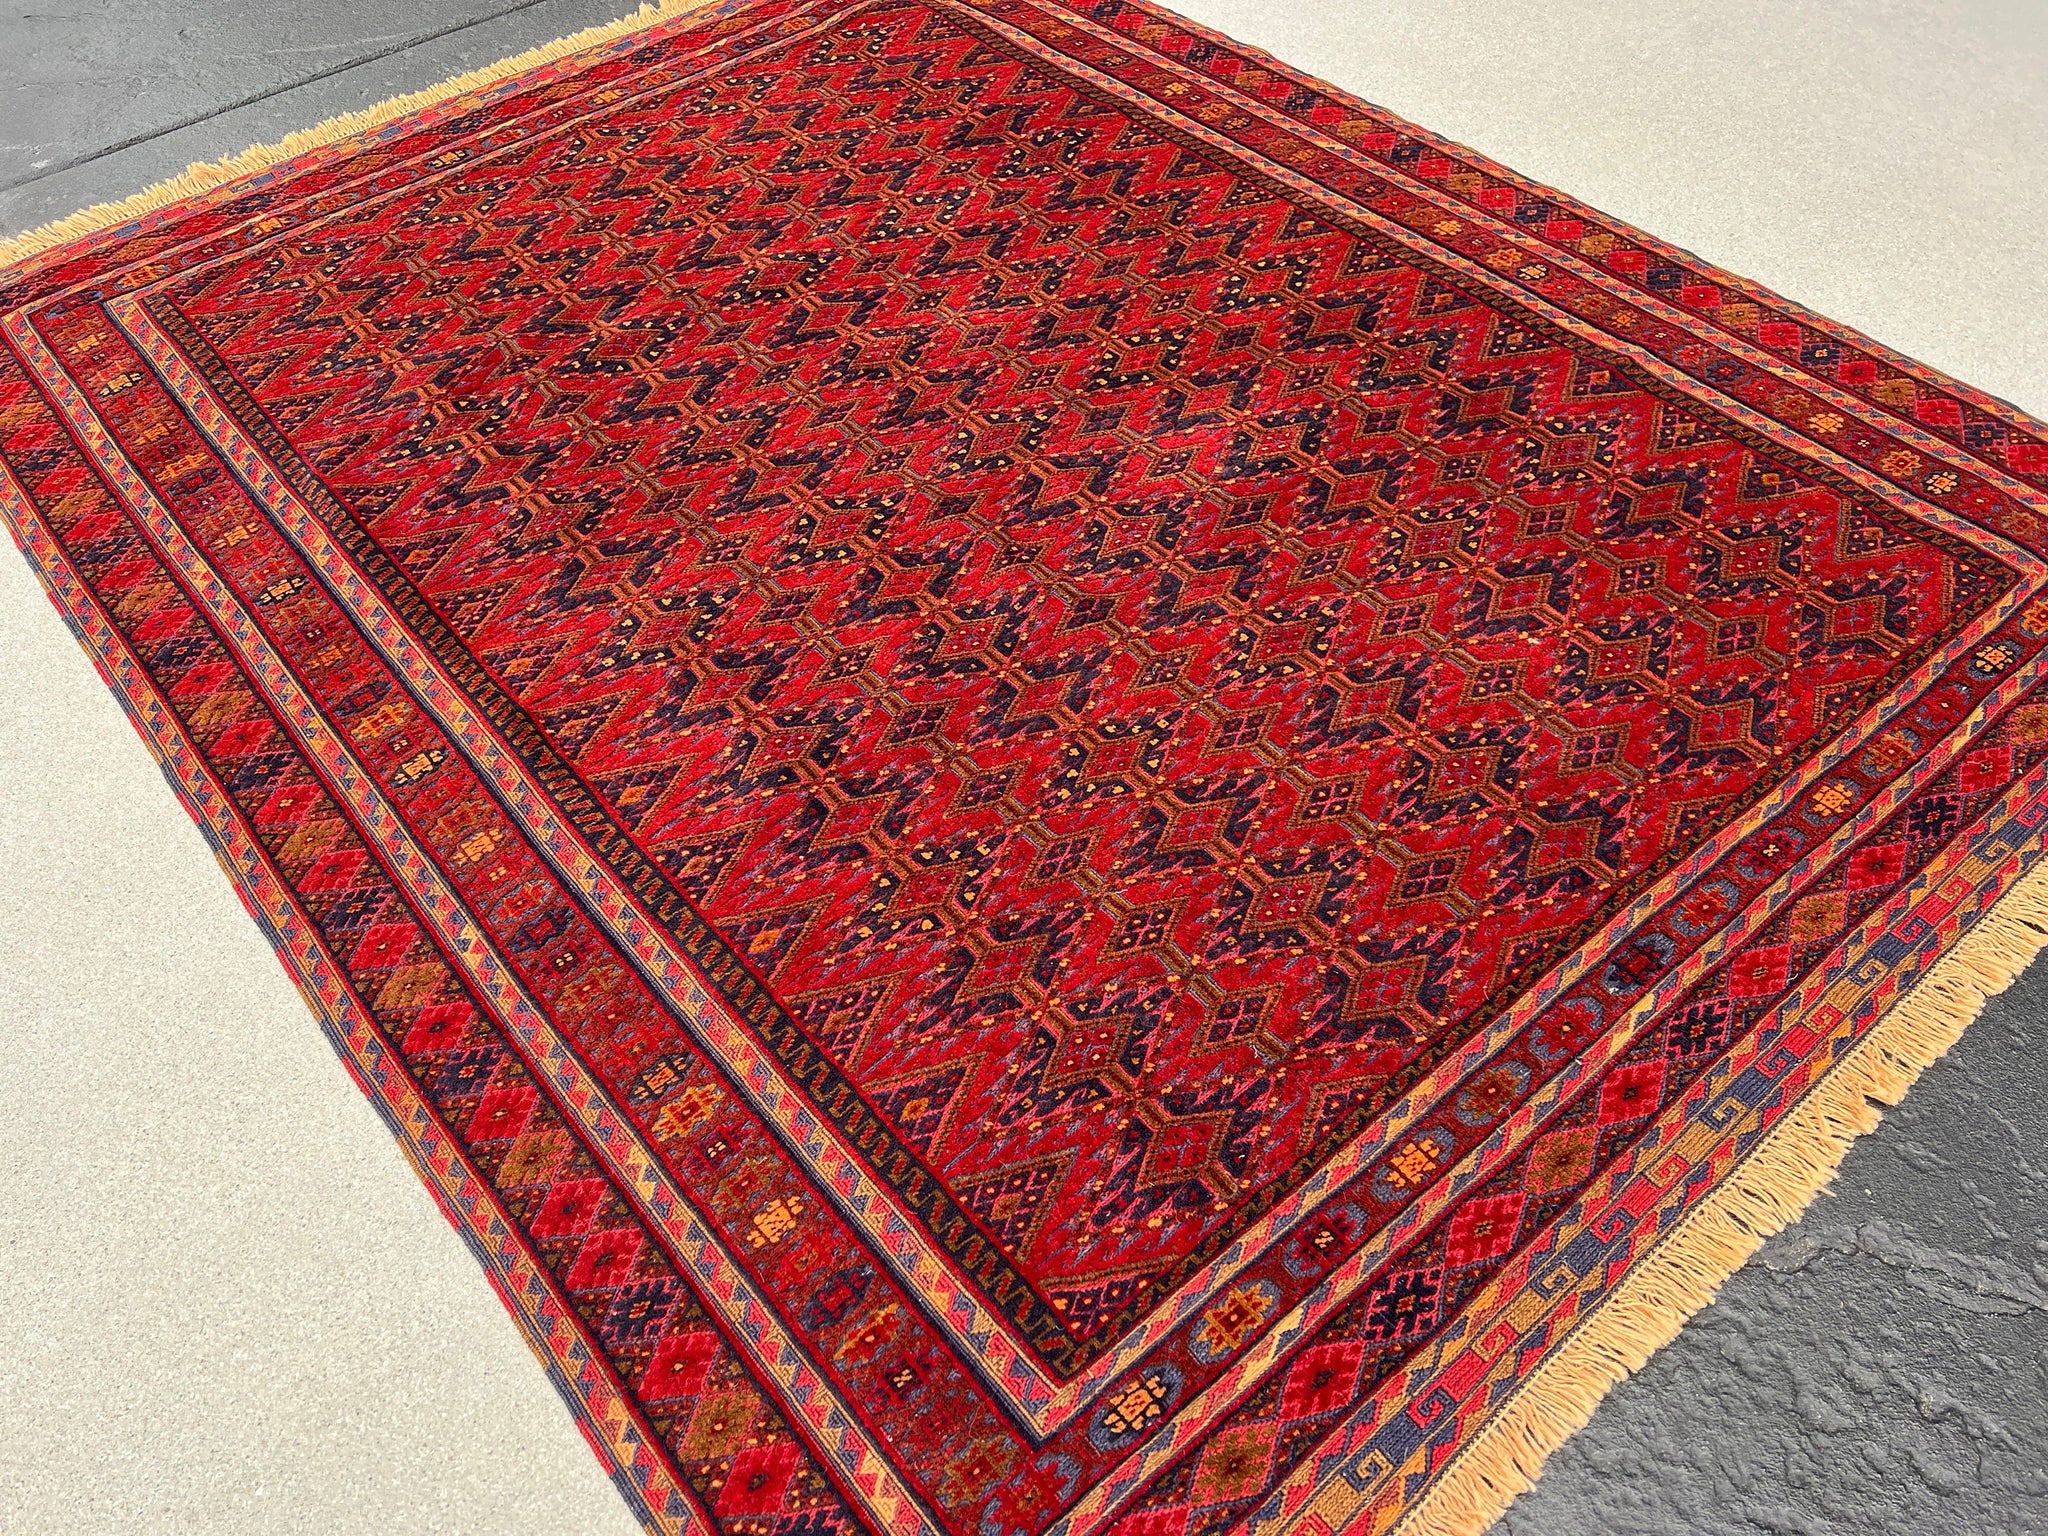 5x7 (150x215) Handmade Vintage Baluch Afghan Rug | Blood Crimson Red Navy Blue Taupe Chocolate Orange Olive Green | Hand Knotted Wool